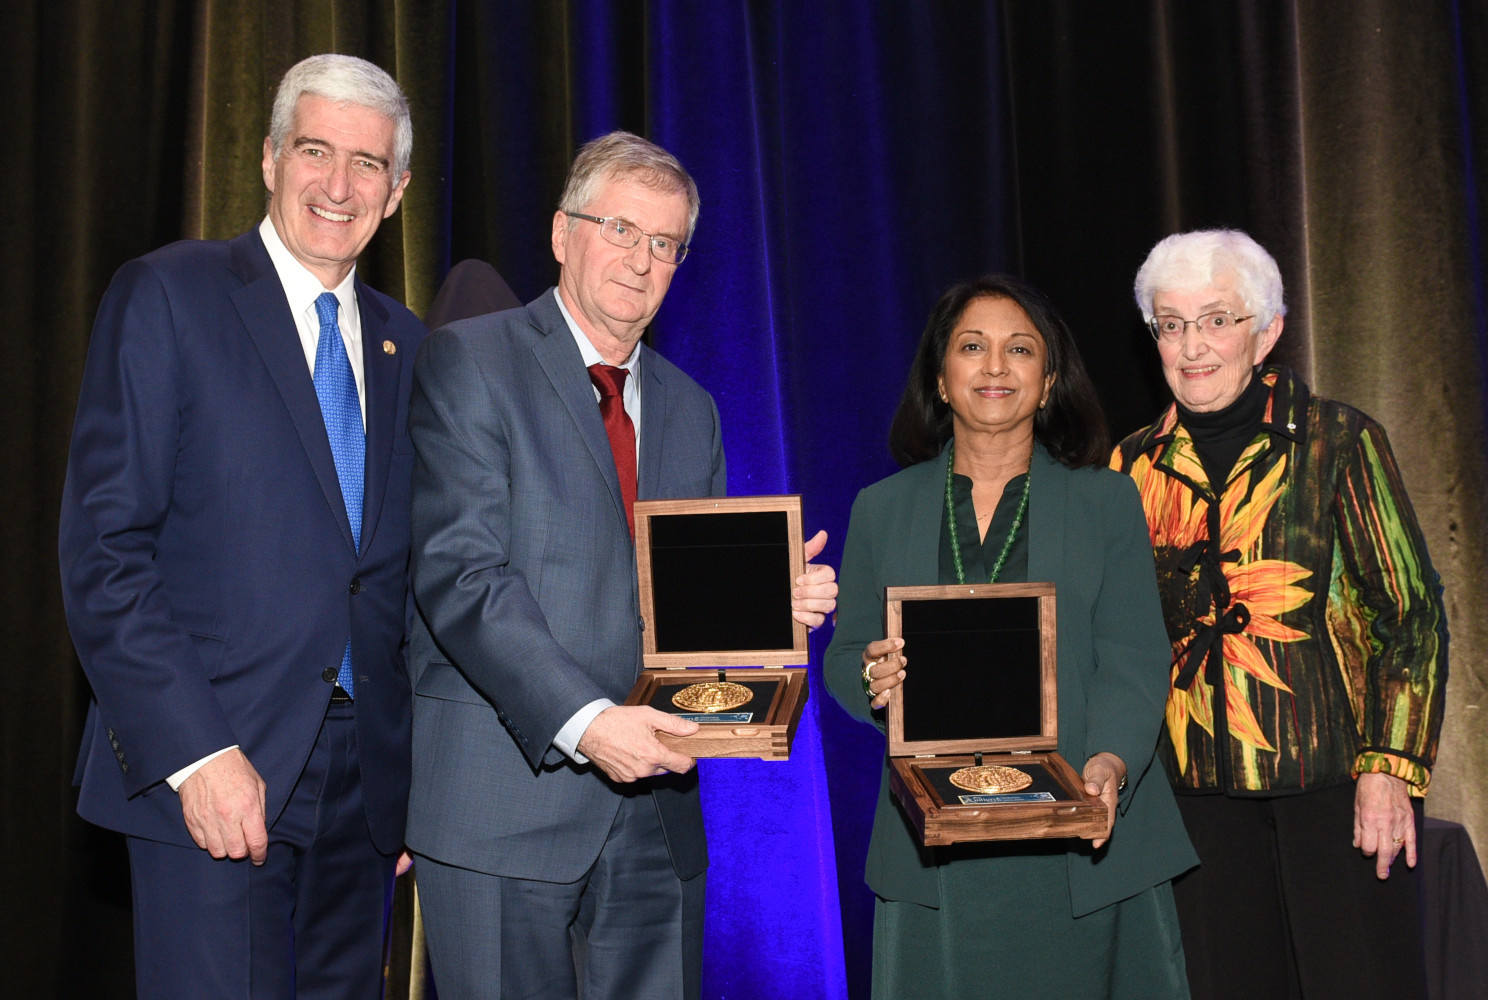 2019 - Bernard Lachapelle, President Innovation Life Canada-Prix Galien Canada; Dr. Brian 
O'Dowd and Dr. Susan George, Faculty of Medicine, University of Toronto ; Dr. Jean Gray, 
President of the Jury of Prix Galien Canada